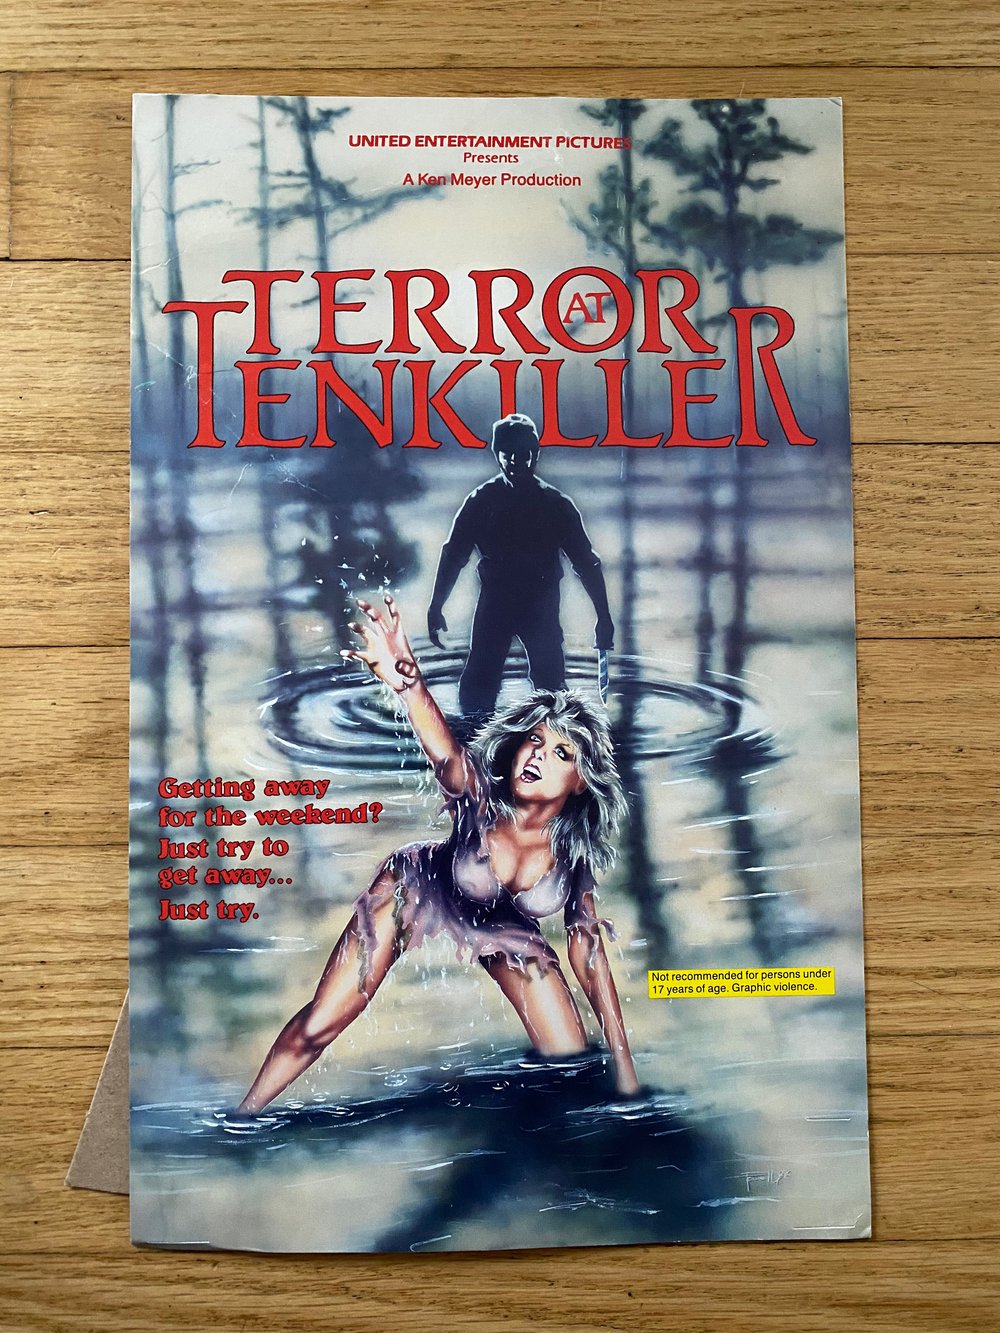 1986 TERROR AT TENKILLER United Home Entertainment Carboard Tabletop Promotional Standee